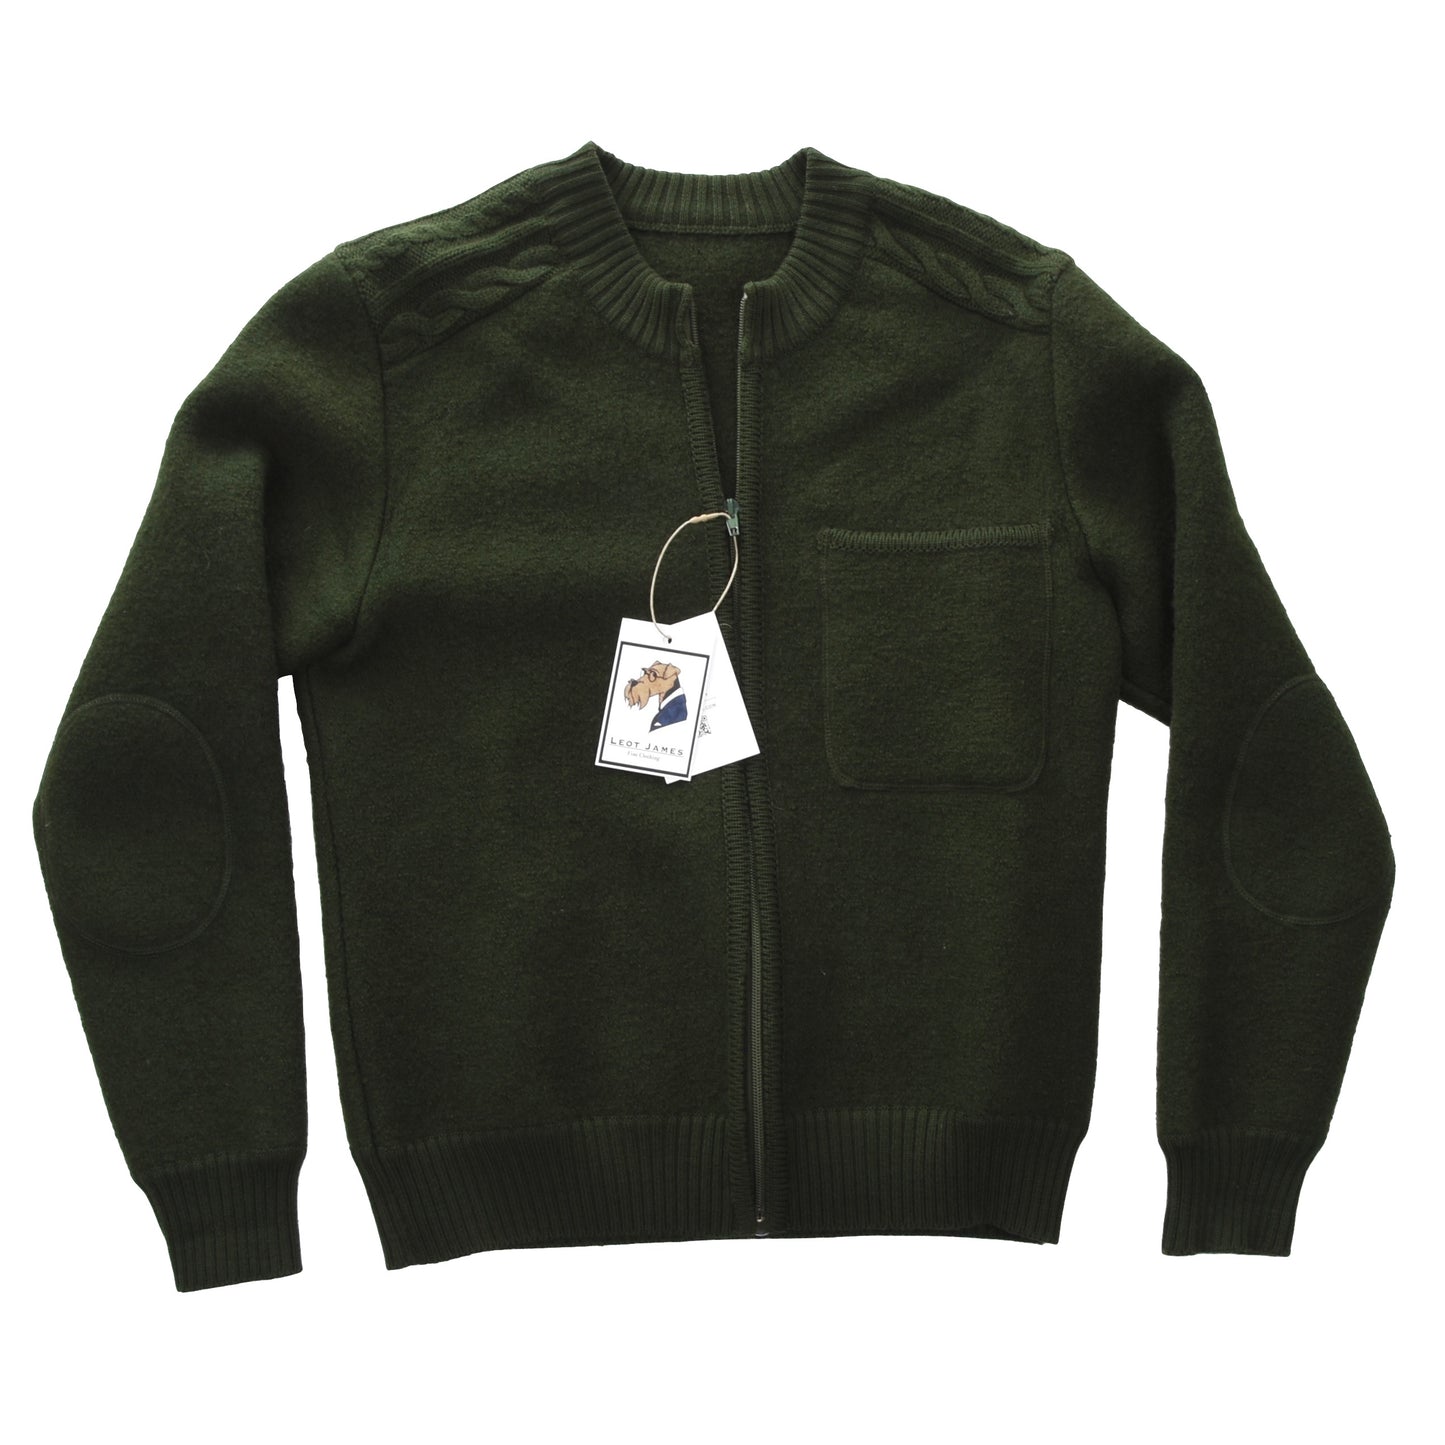 Classic Boiled Wool Cardigan/Jacket 48cm Chest - Green